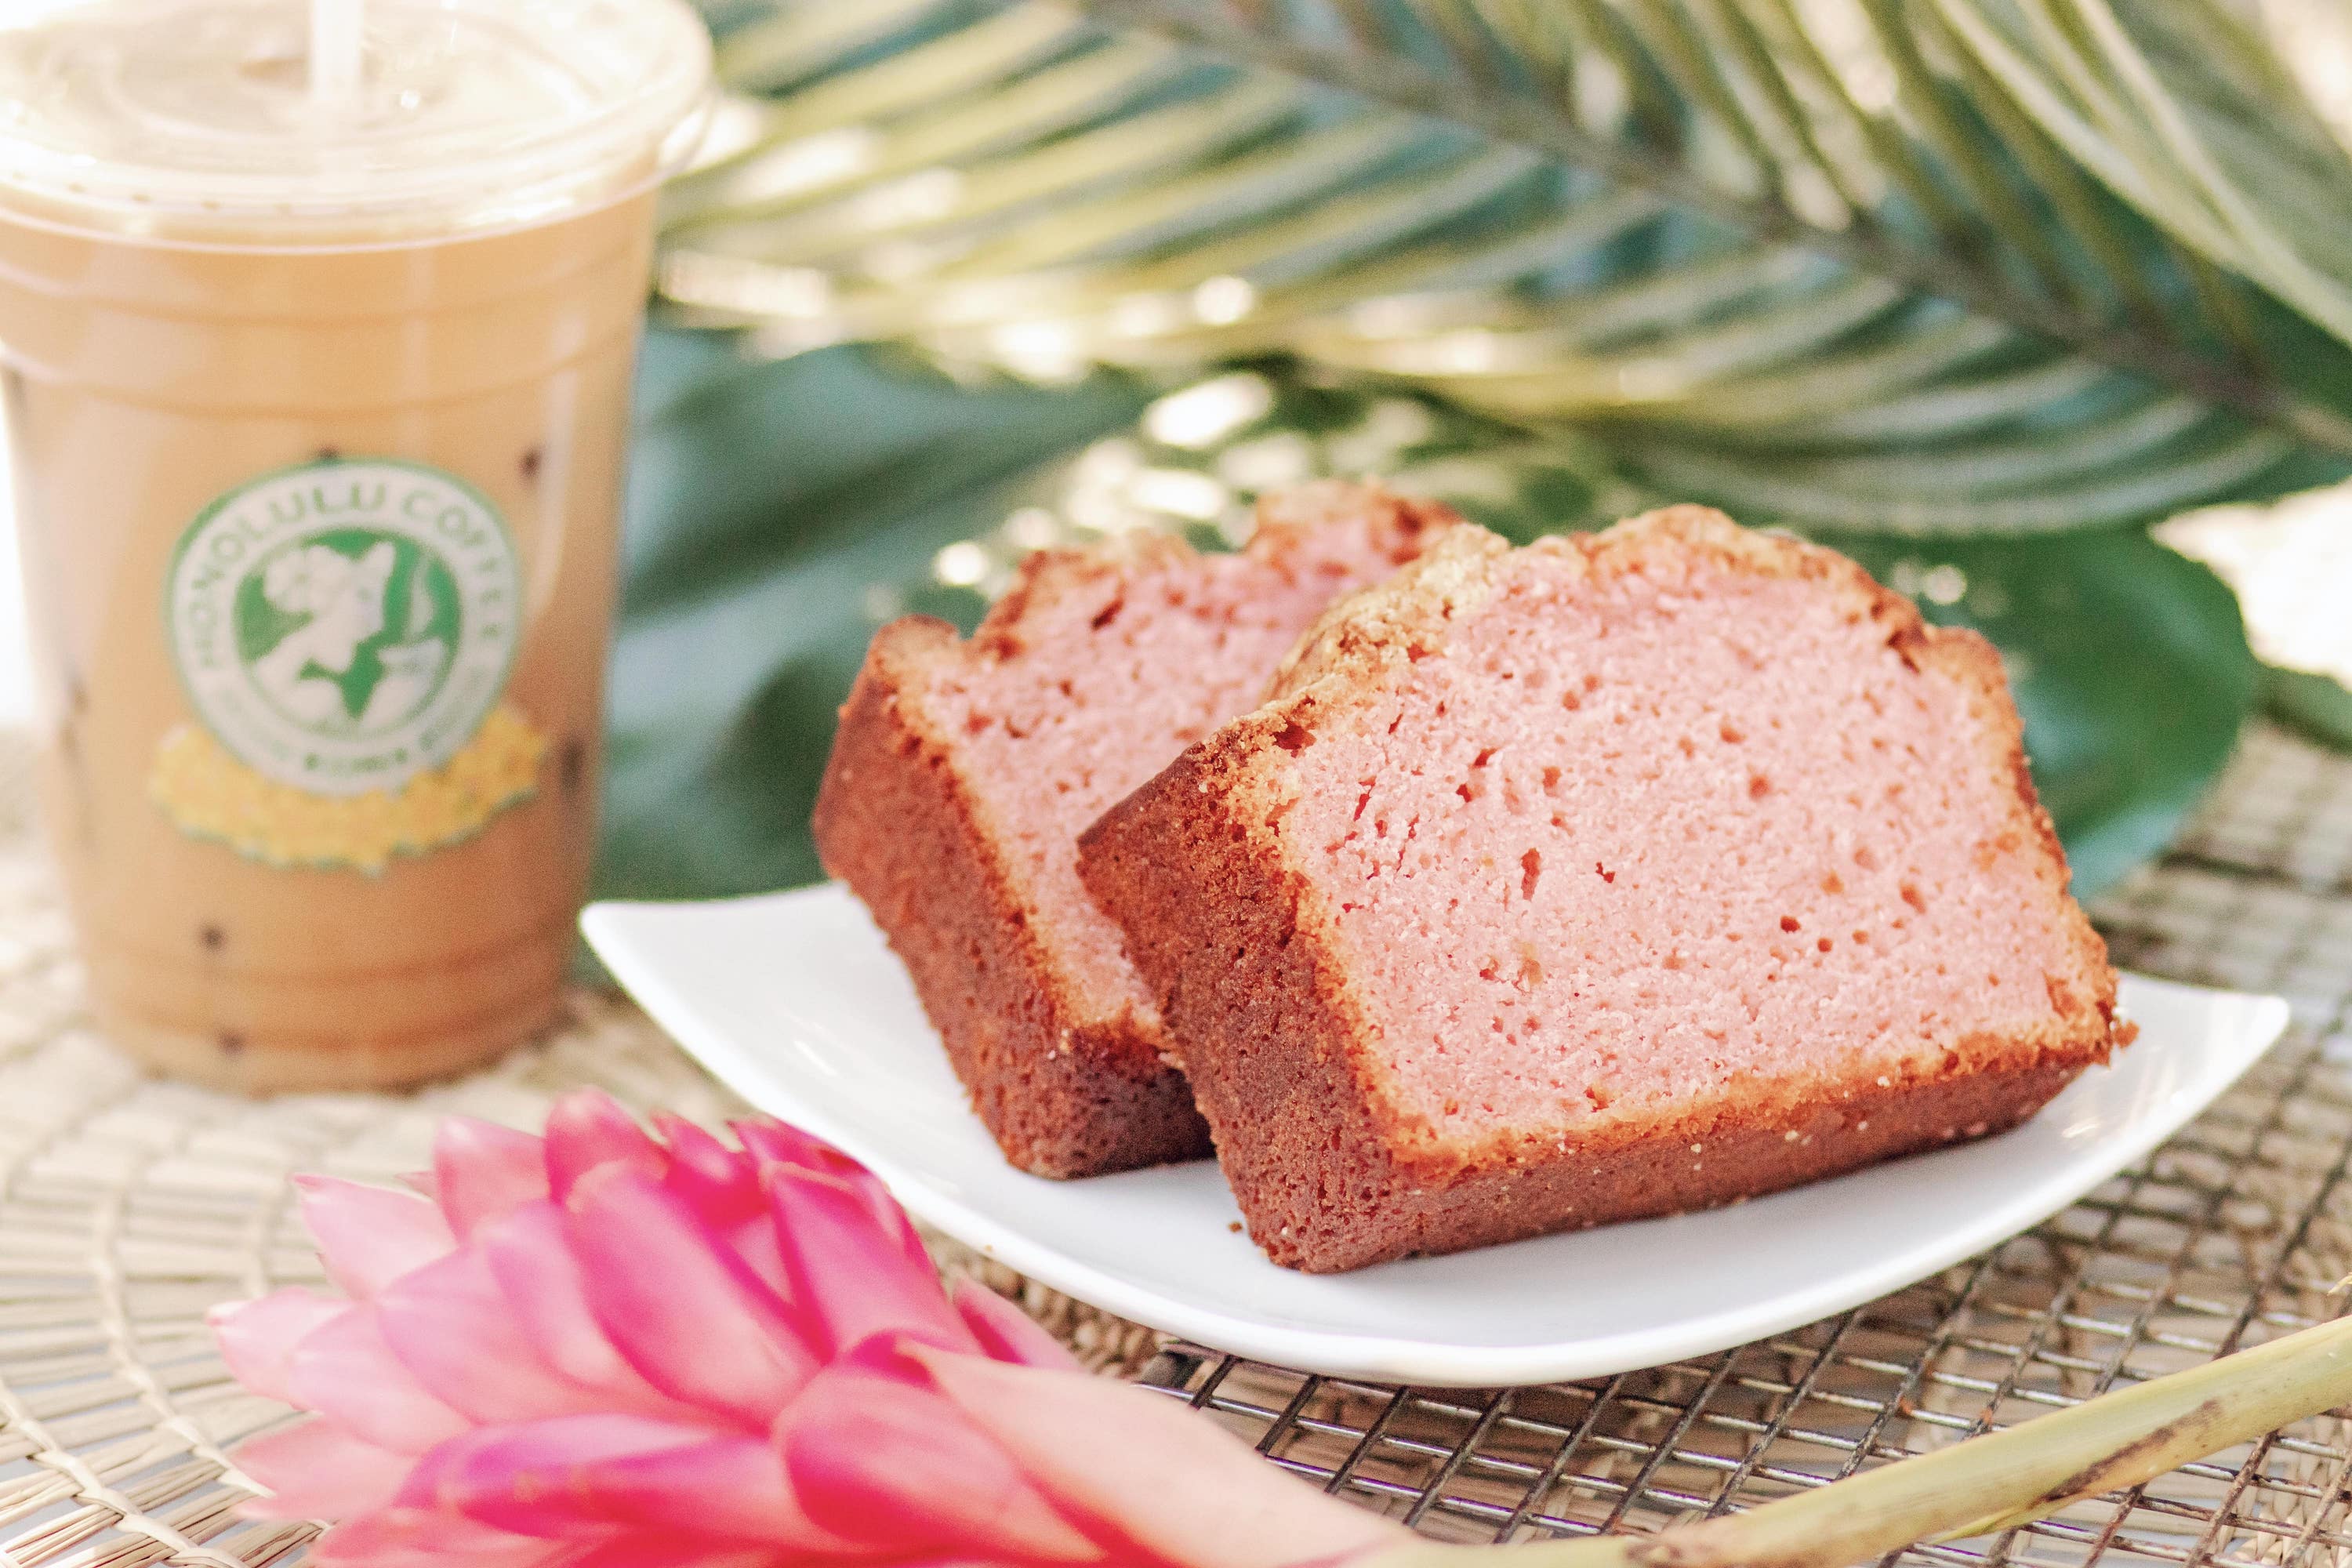 Slices of Guava Bread next to tropical flowers and an iced latte